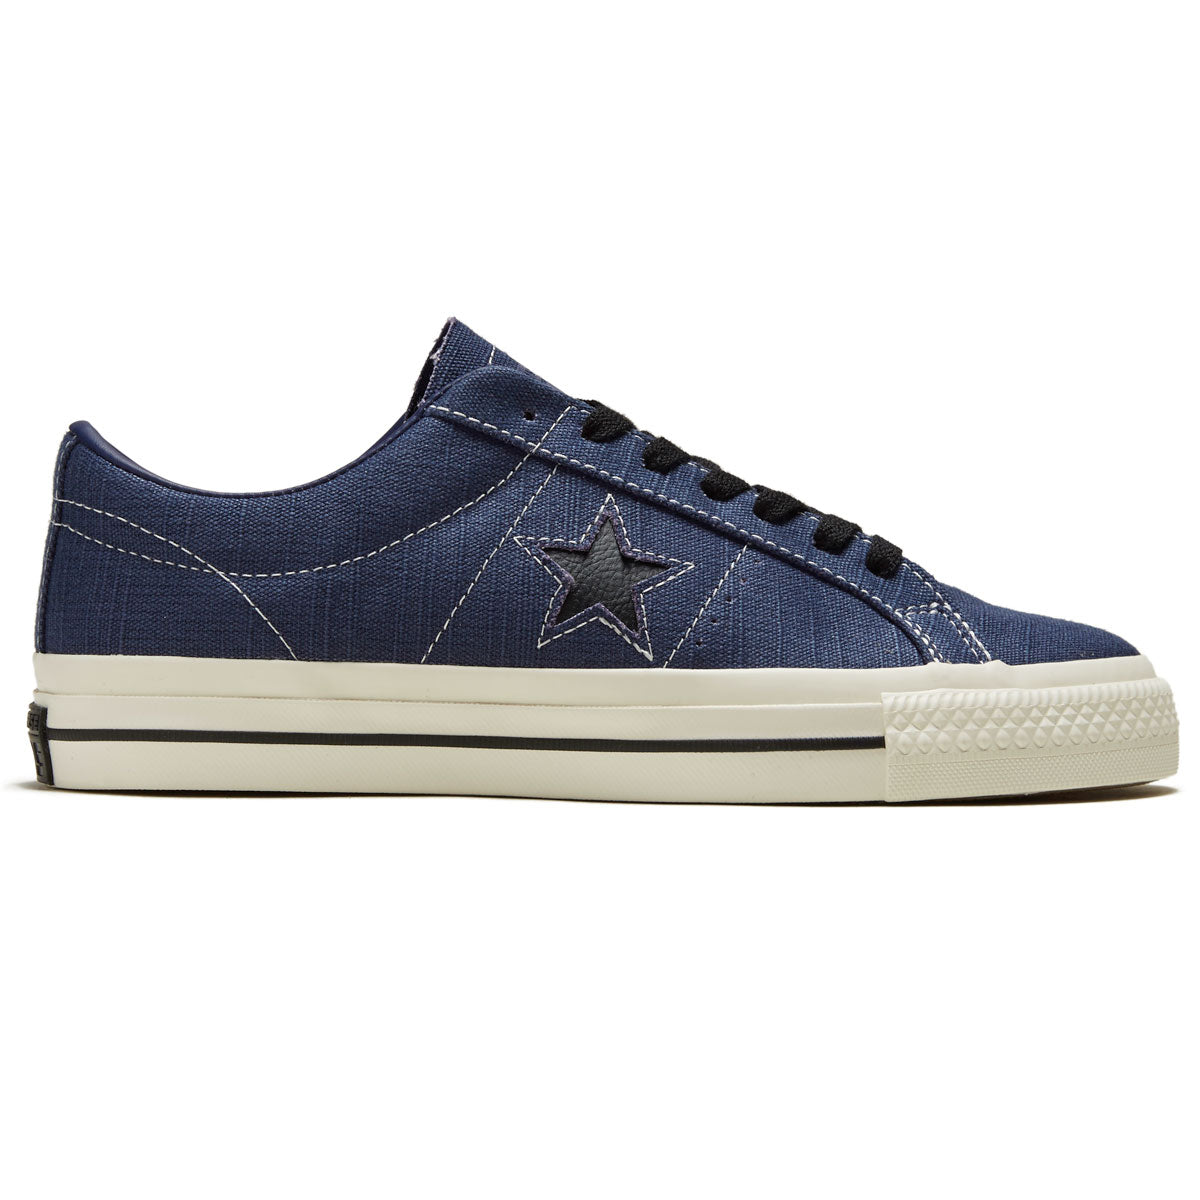 Converse One Star Pro Shoes - Uncharted Waters/Egret/Black – CCS